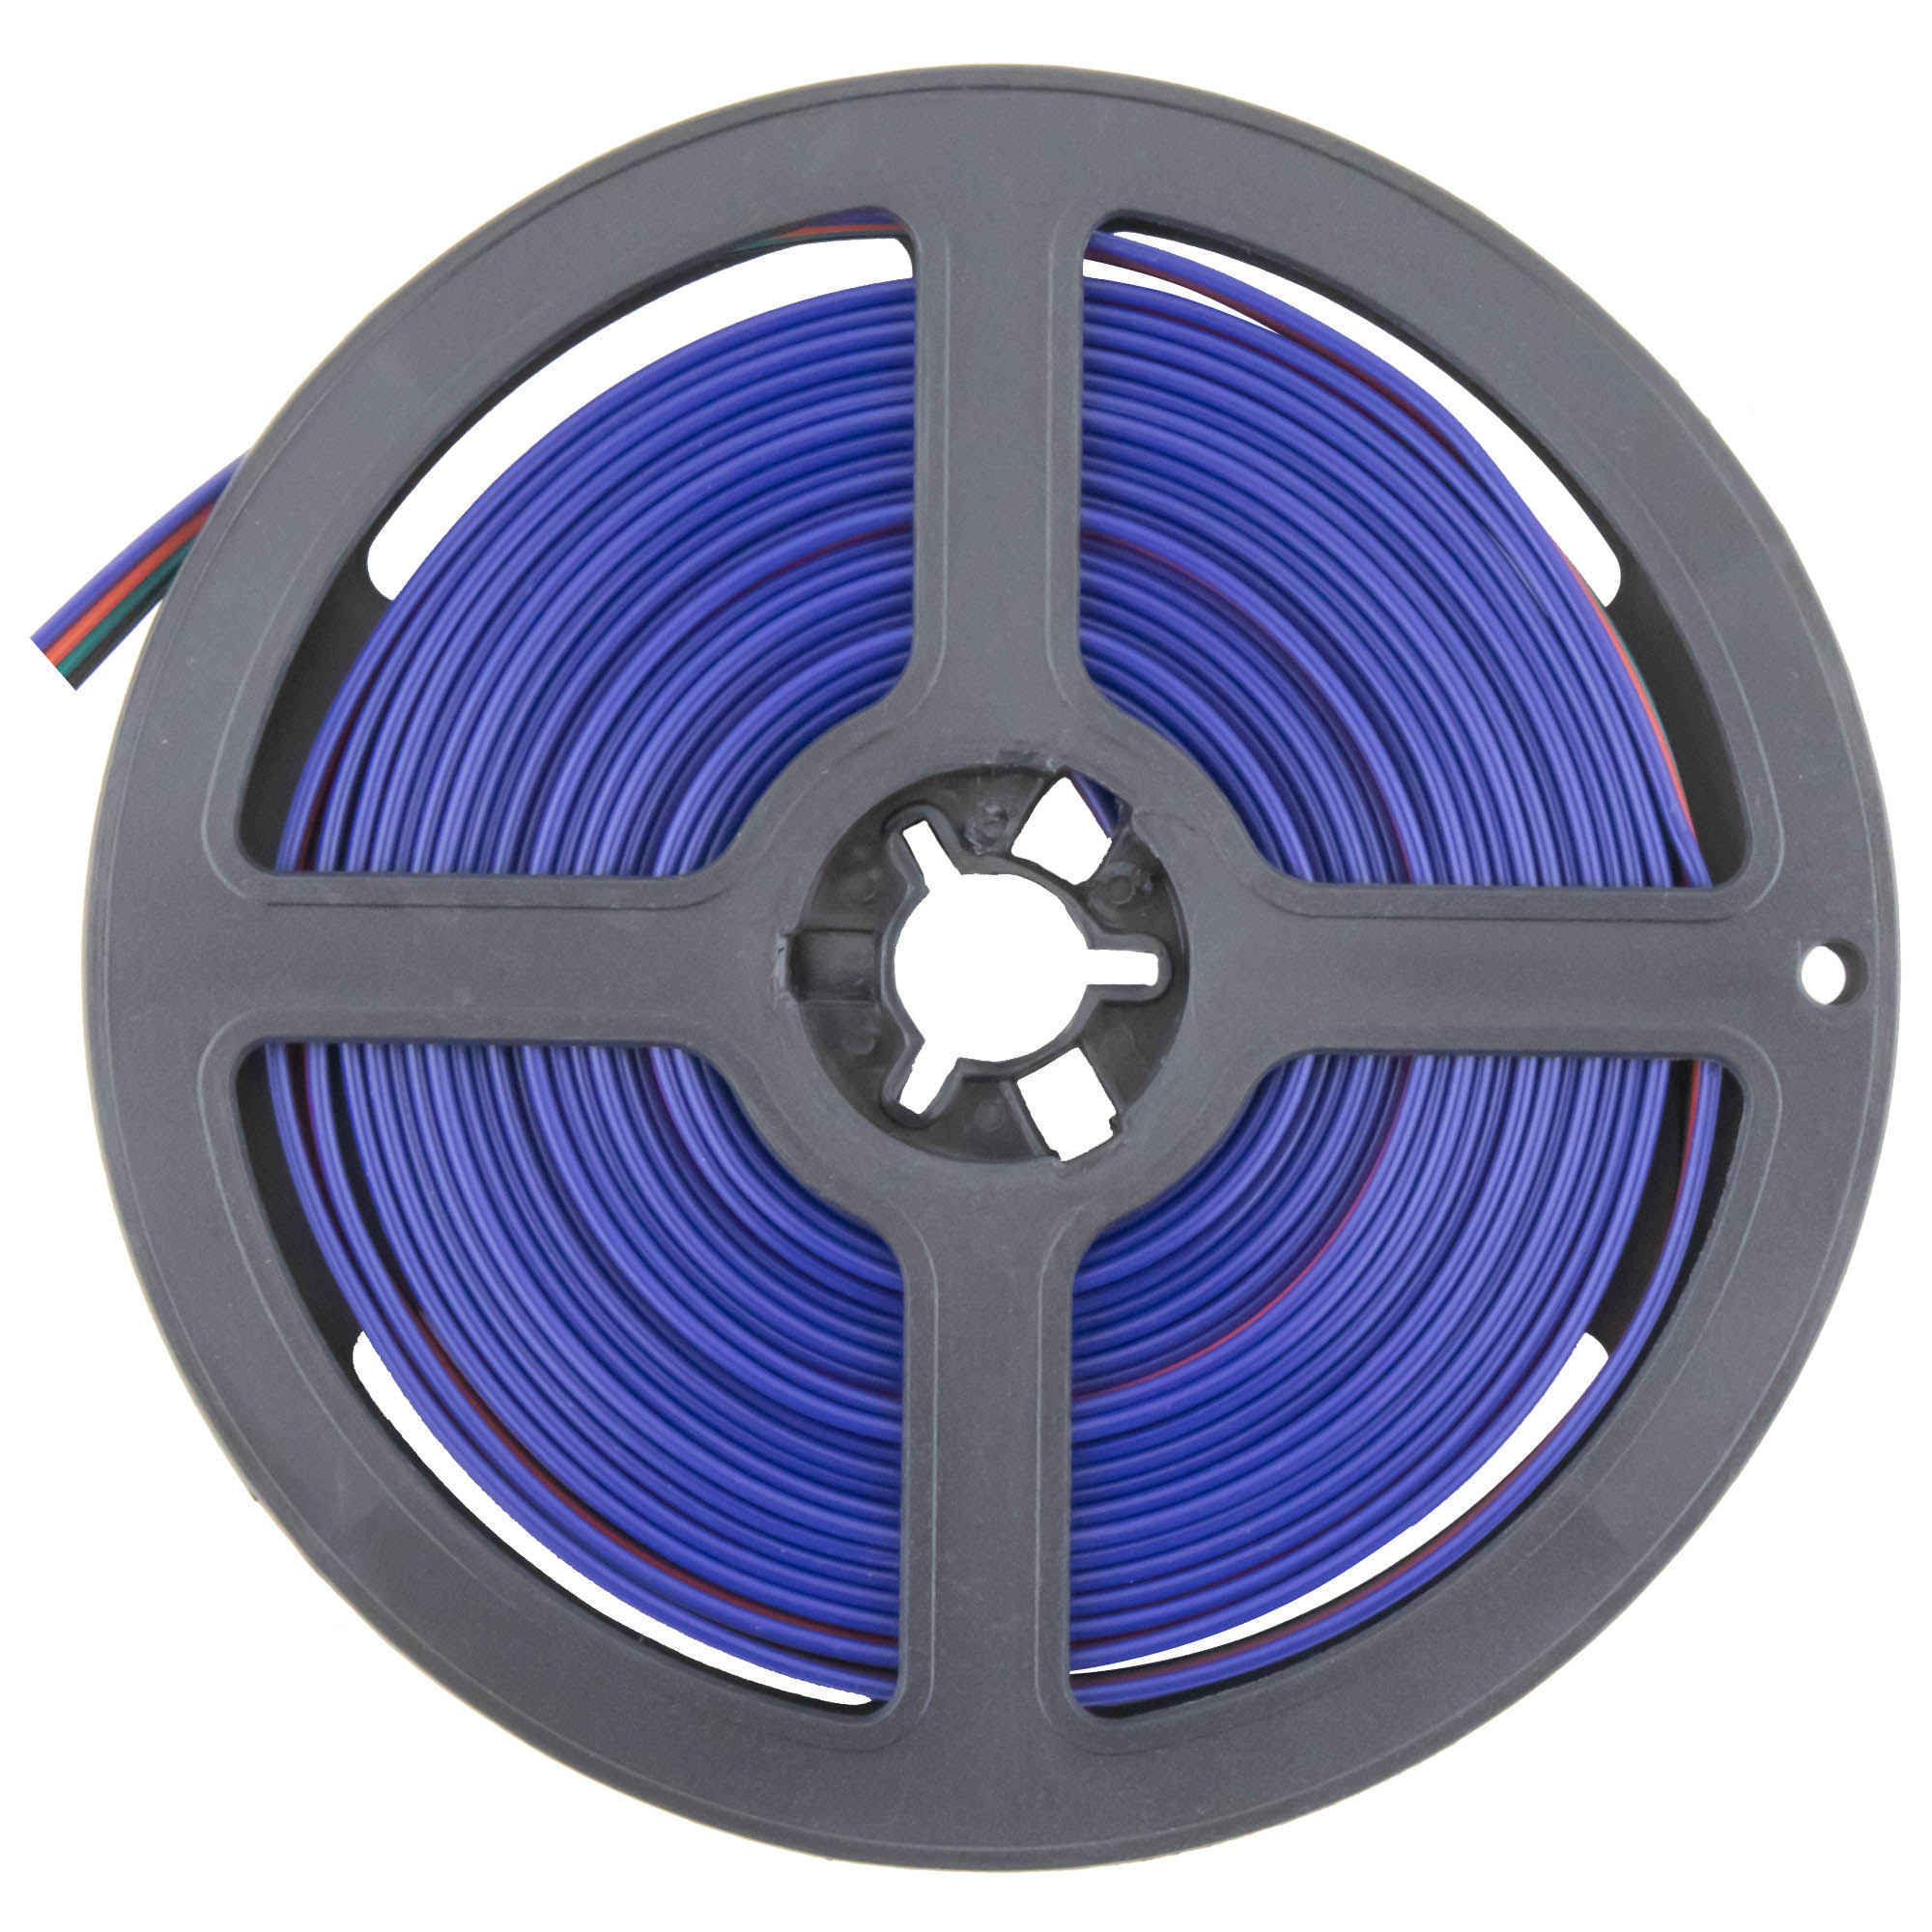 RGB connection wire - 5 meter